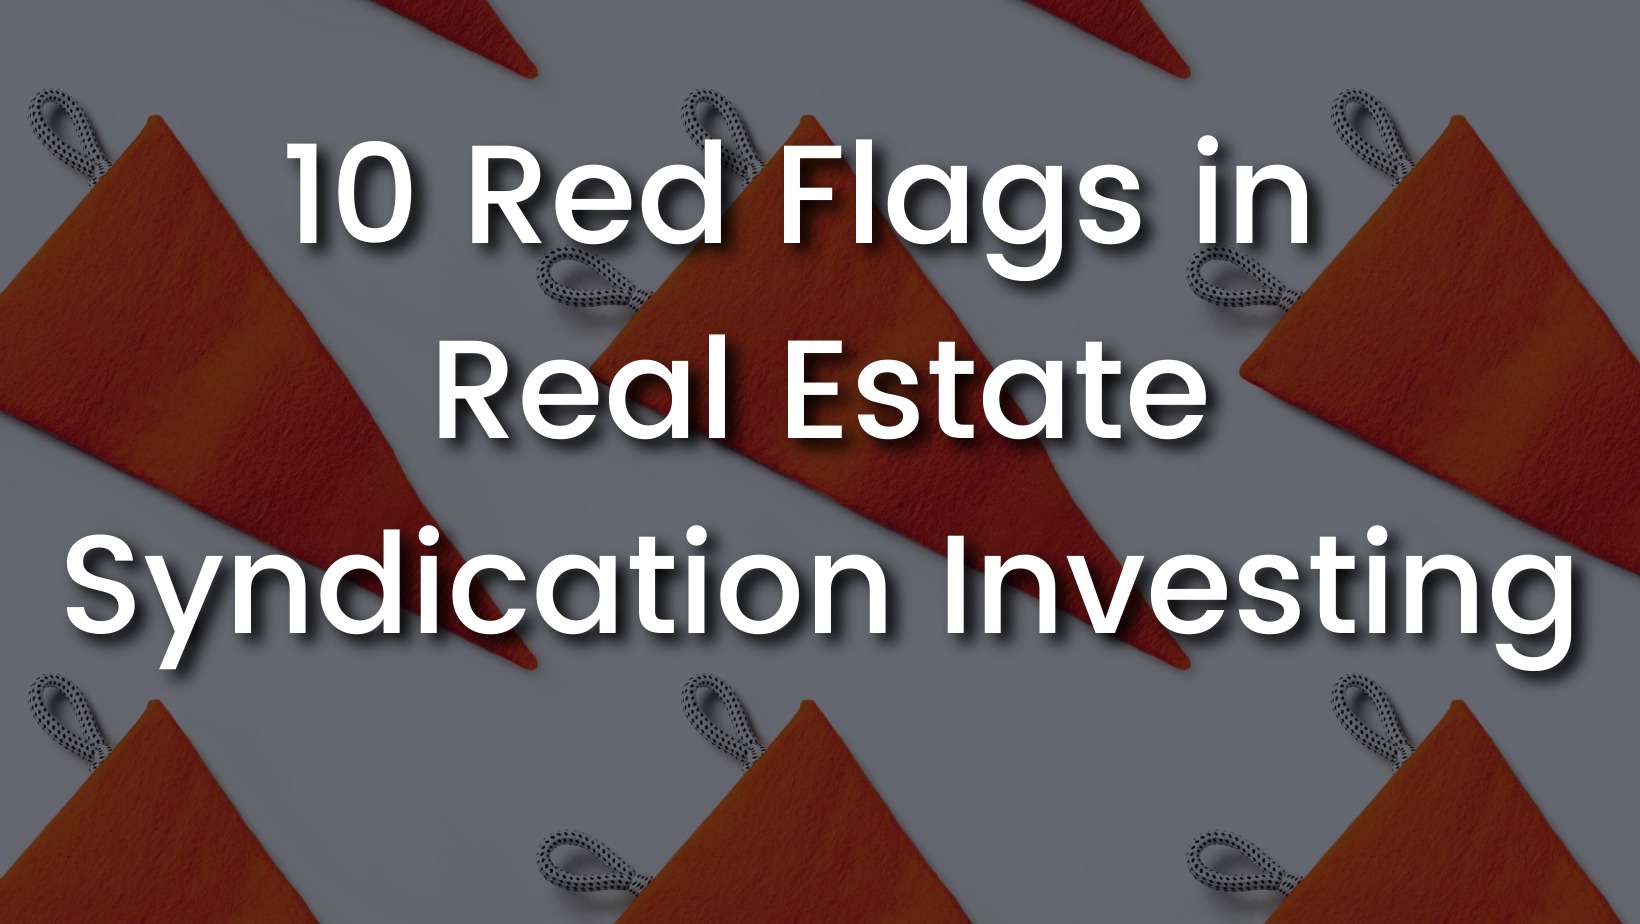 10 Red Flags in Real Estate Syndication Investing